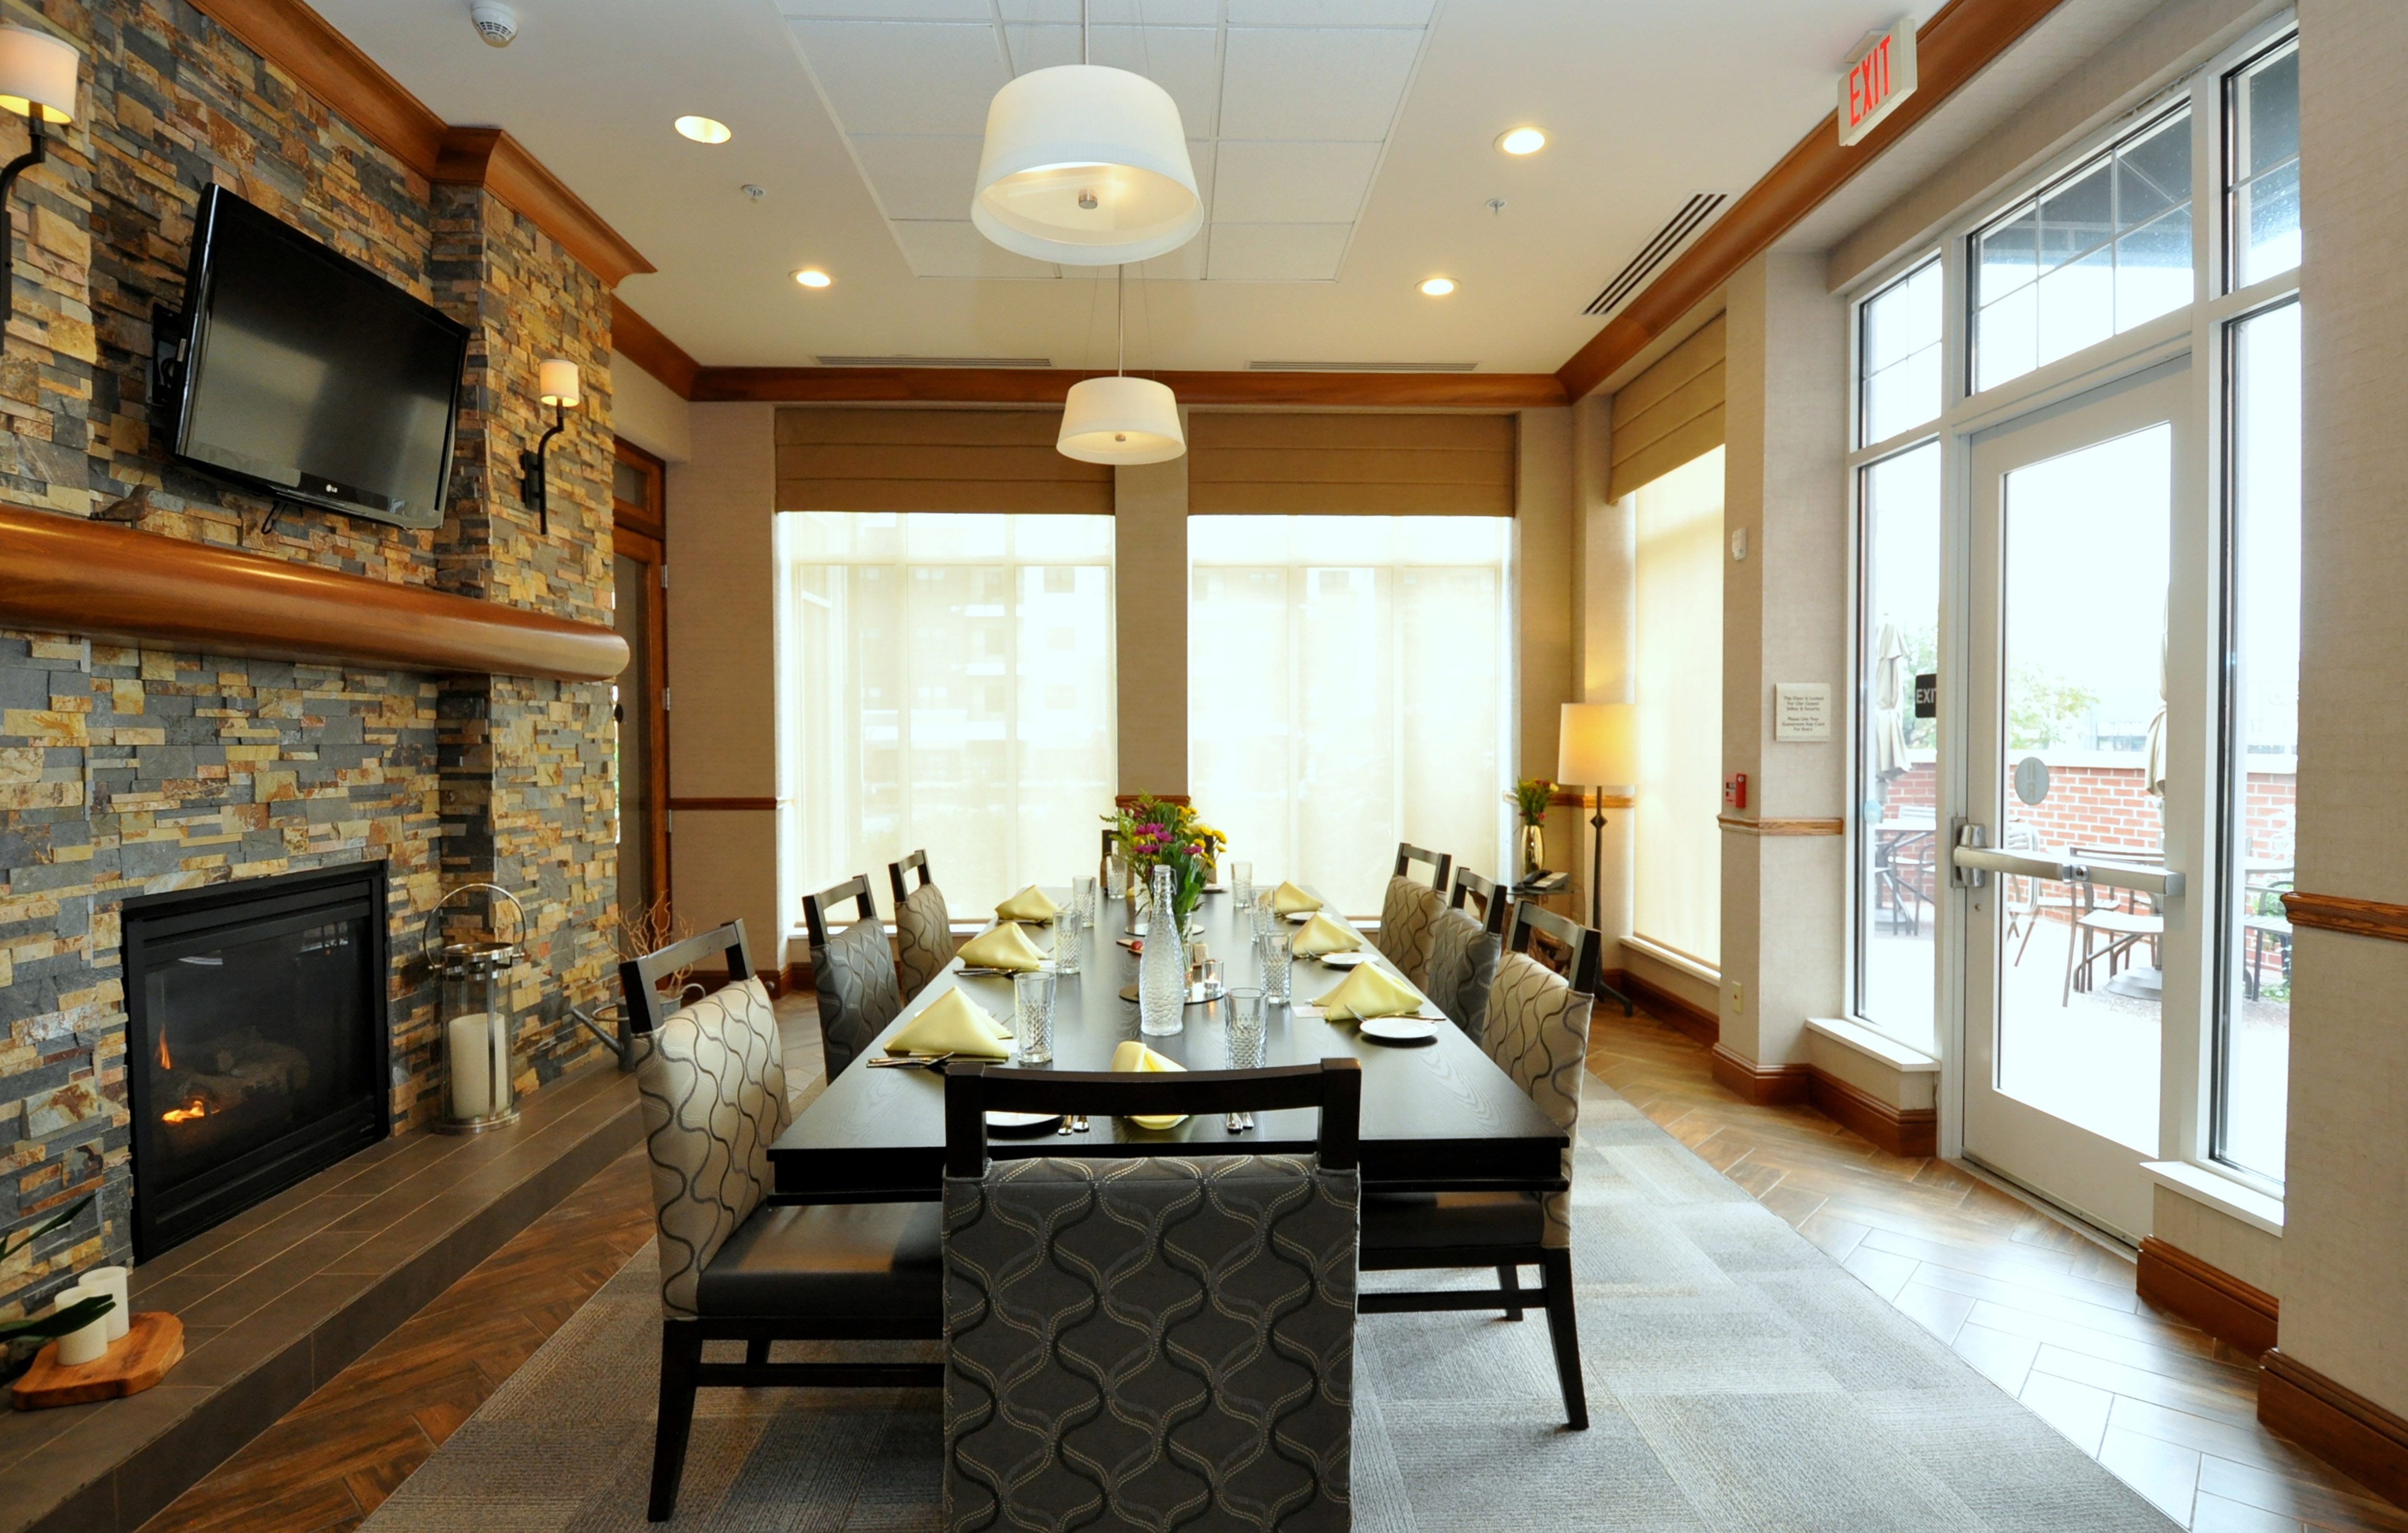 A Large Table next to a Fireplace and HDTV in the Lobby with Large Windows